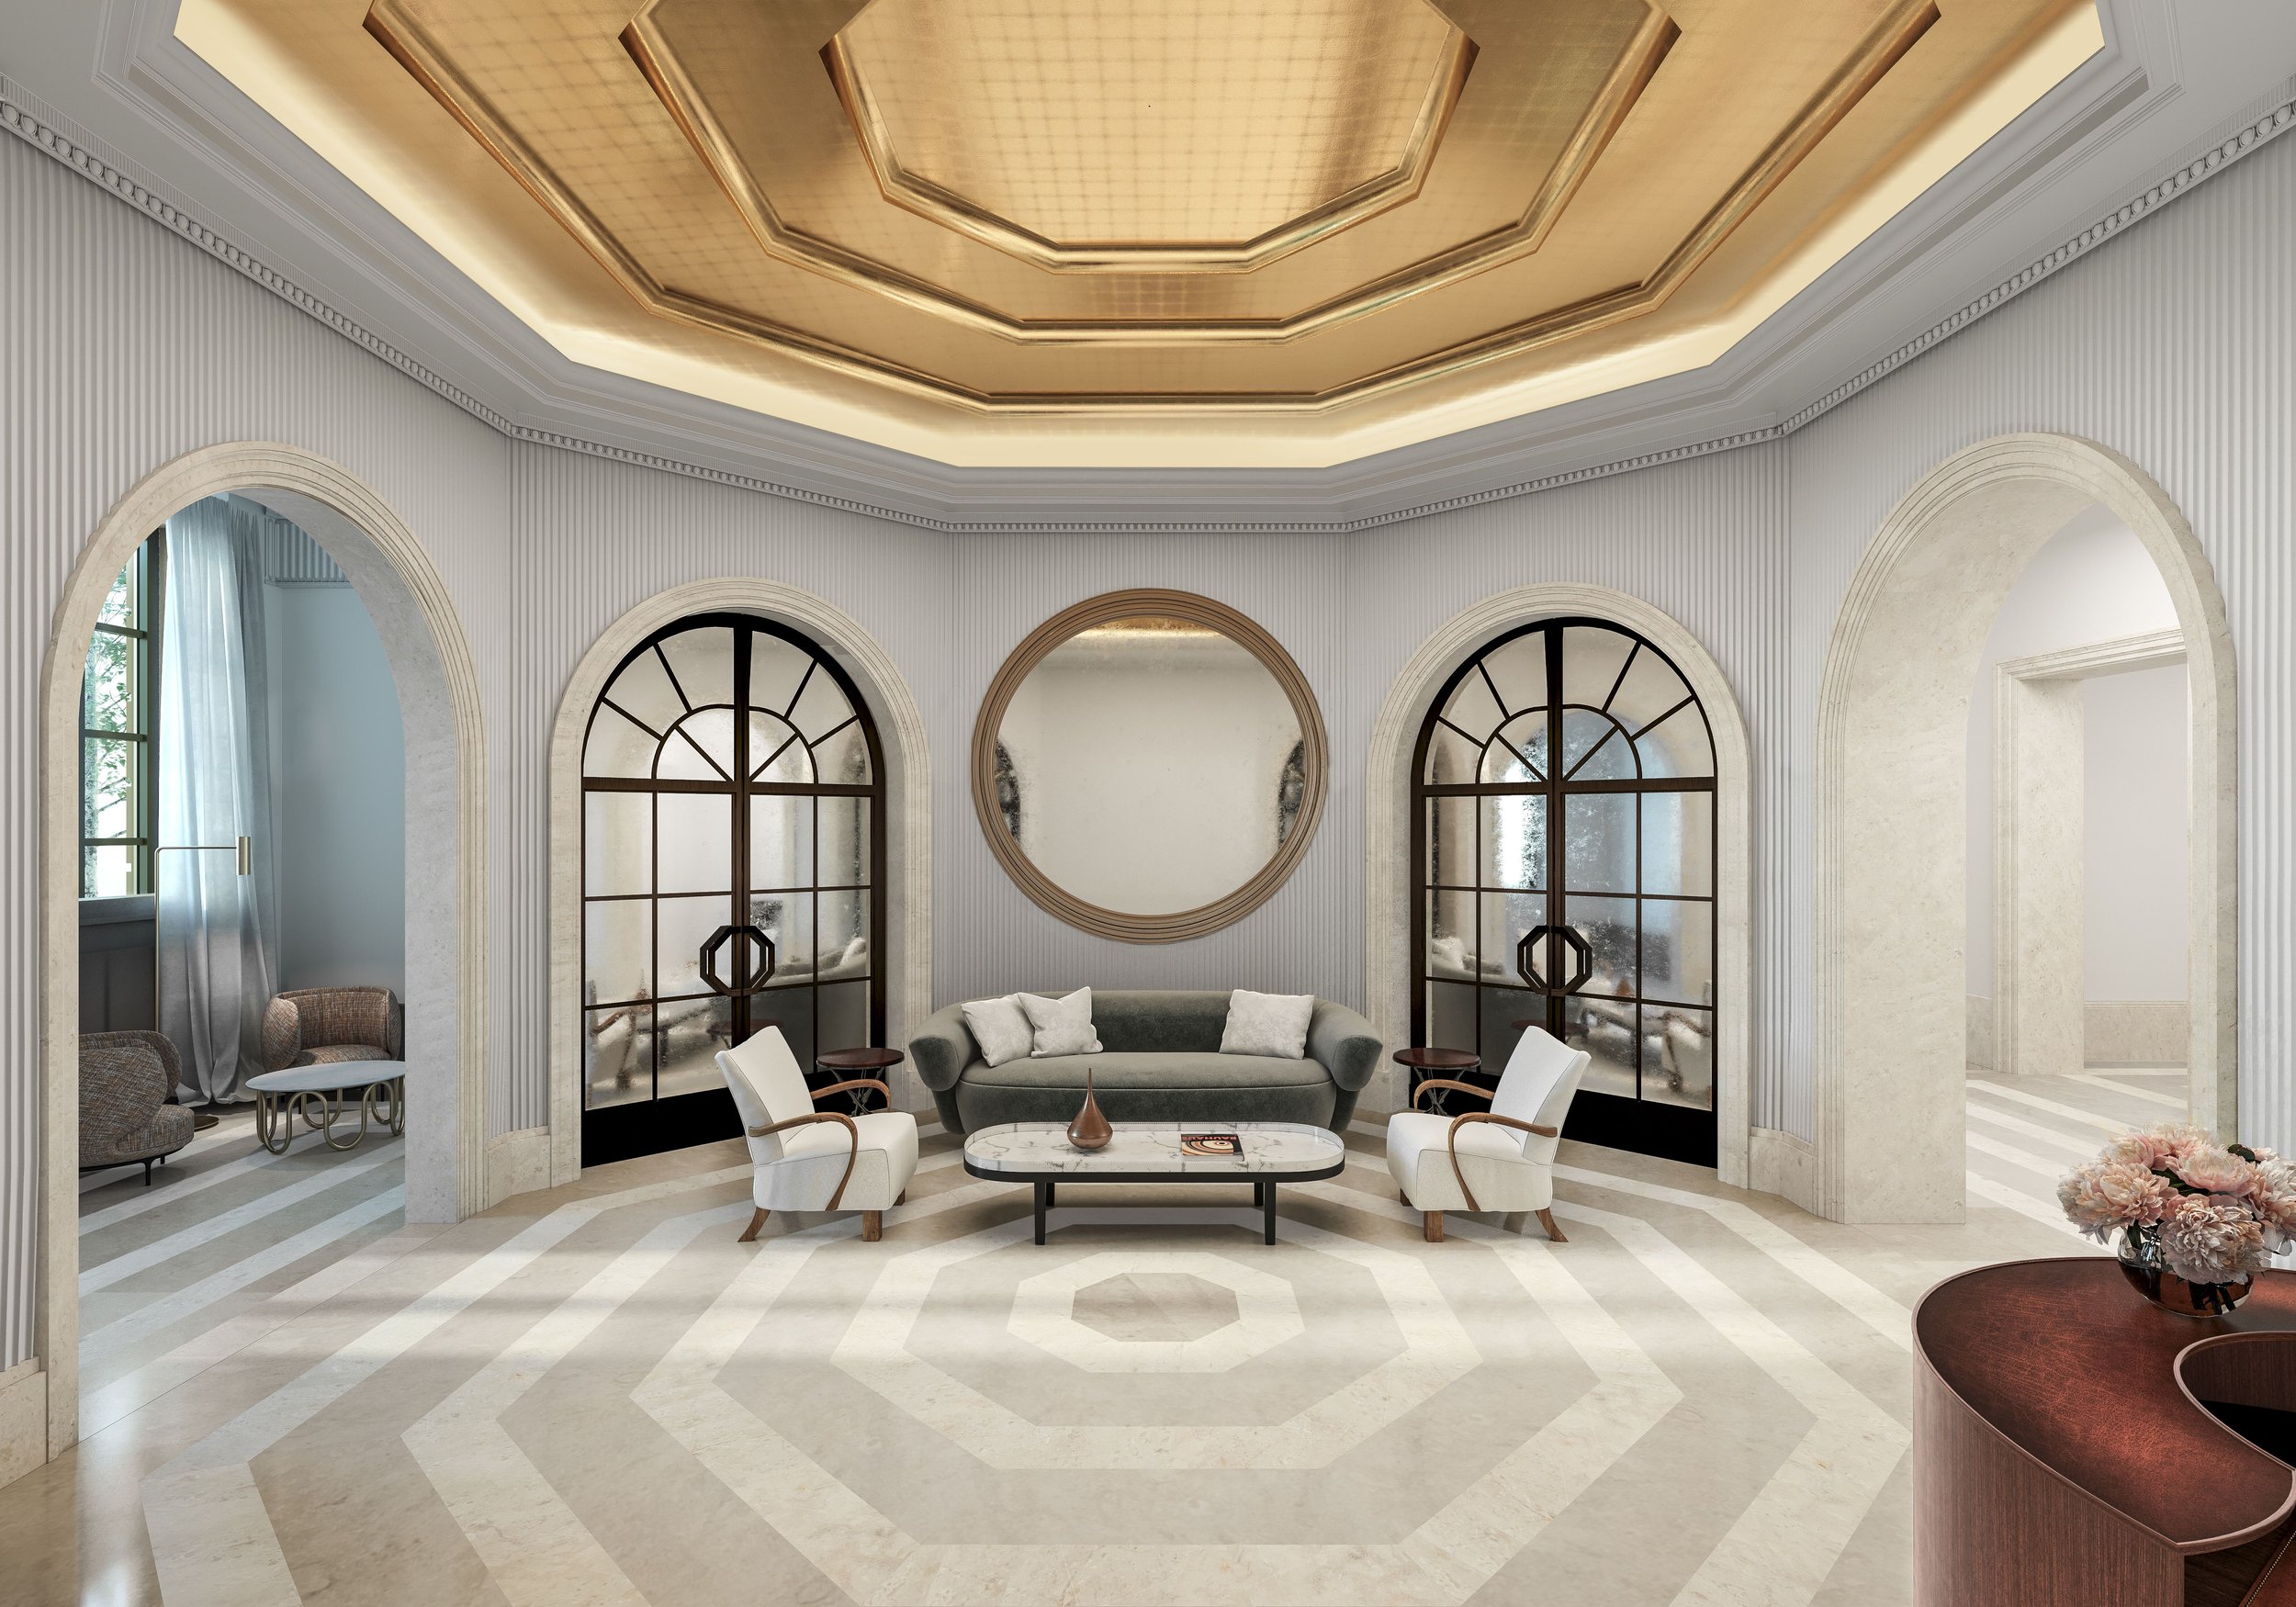   150 East 78th Street   Designed by the award-winning Robert A.M. Stern Architects,  150 East 78th Street  represents the newest boutique building that redefines classical architecture on Manhattan's Upper East Side. Select residences and amenity sp